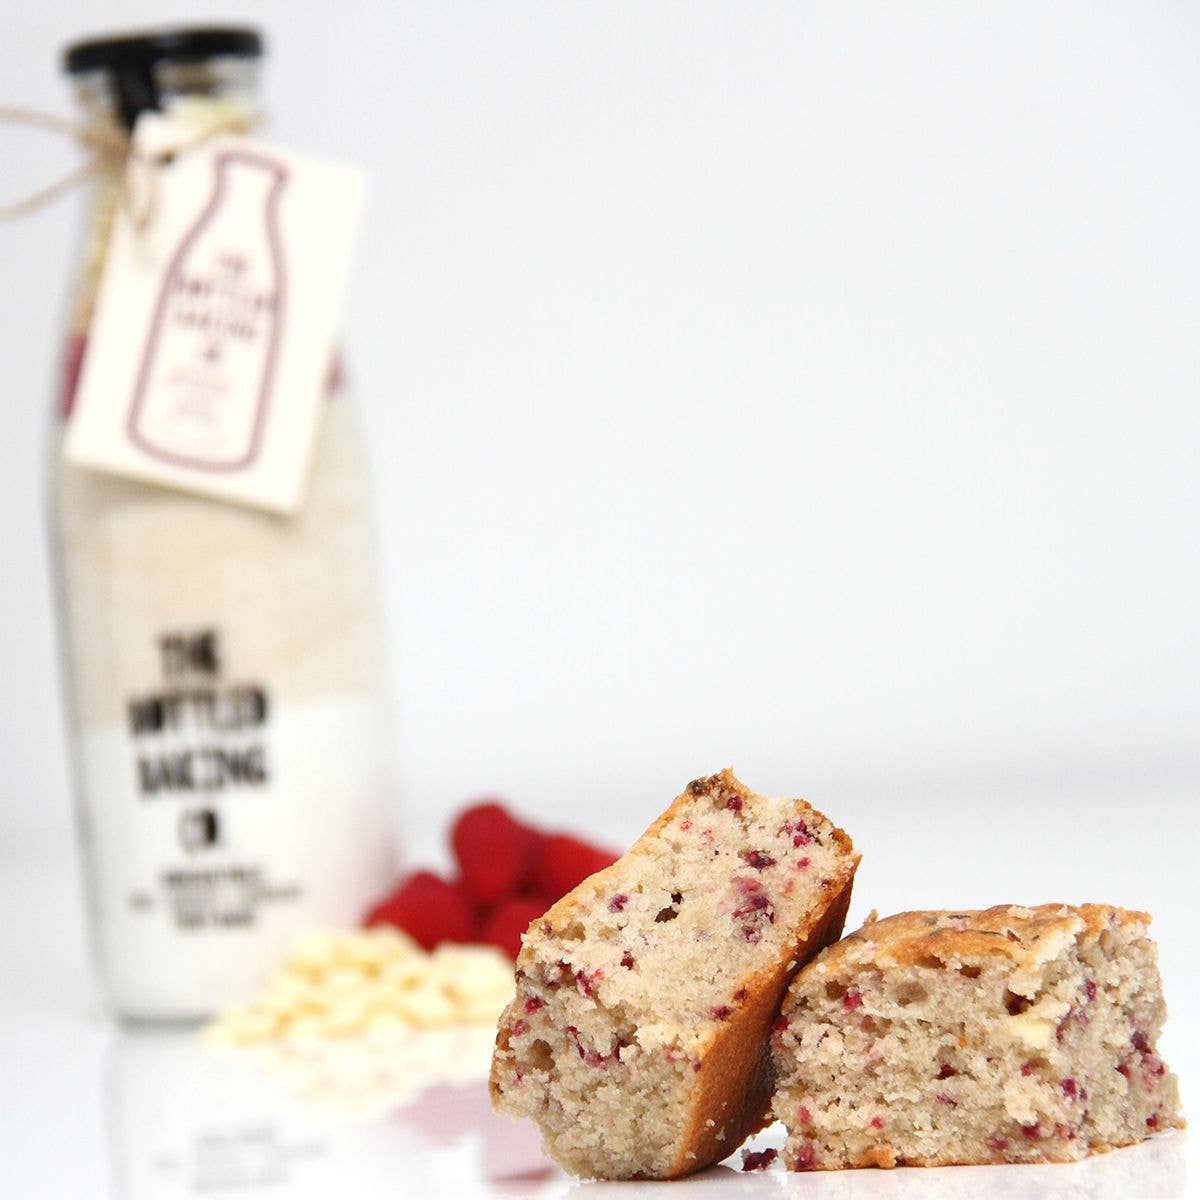 White Chocolate & Raspberry Tray Bake Mix in a Bottle 750ml